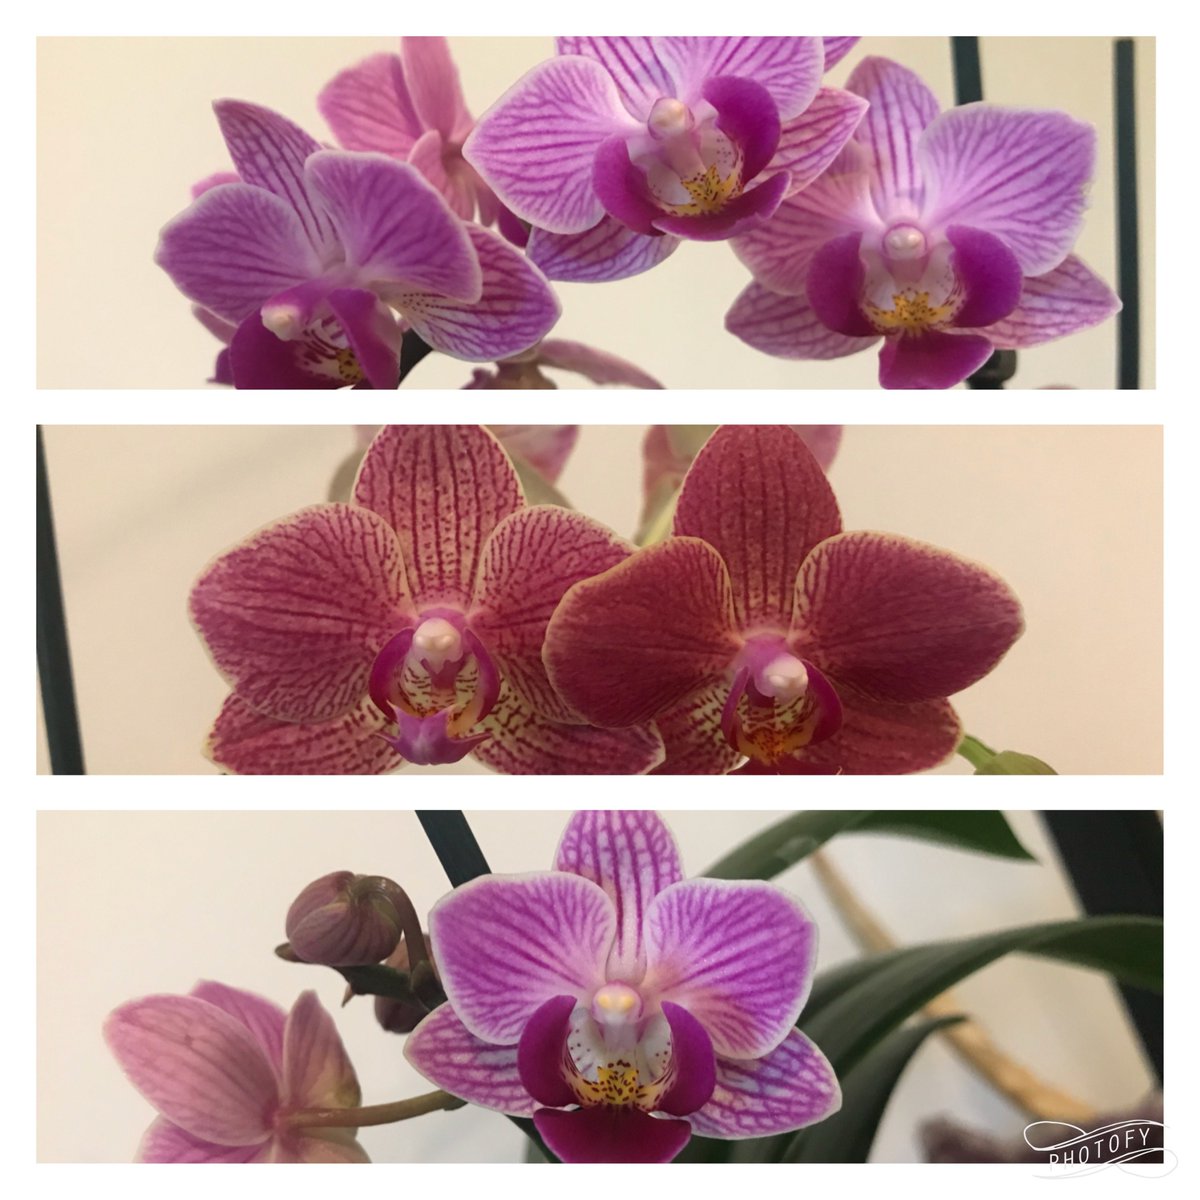 Phal Friday??? #LoveOrchids #MiniPhals